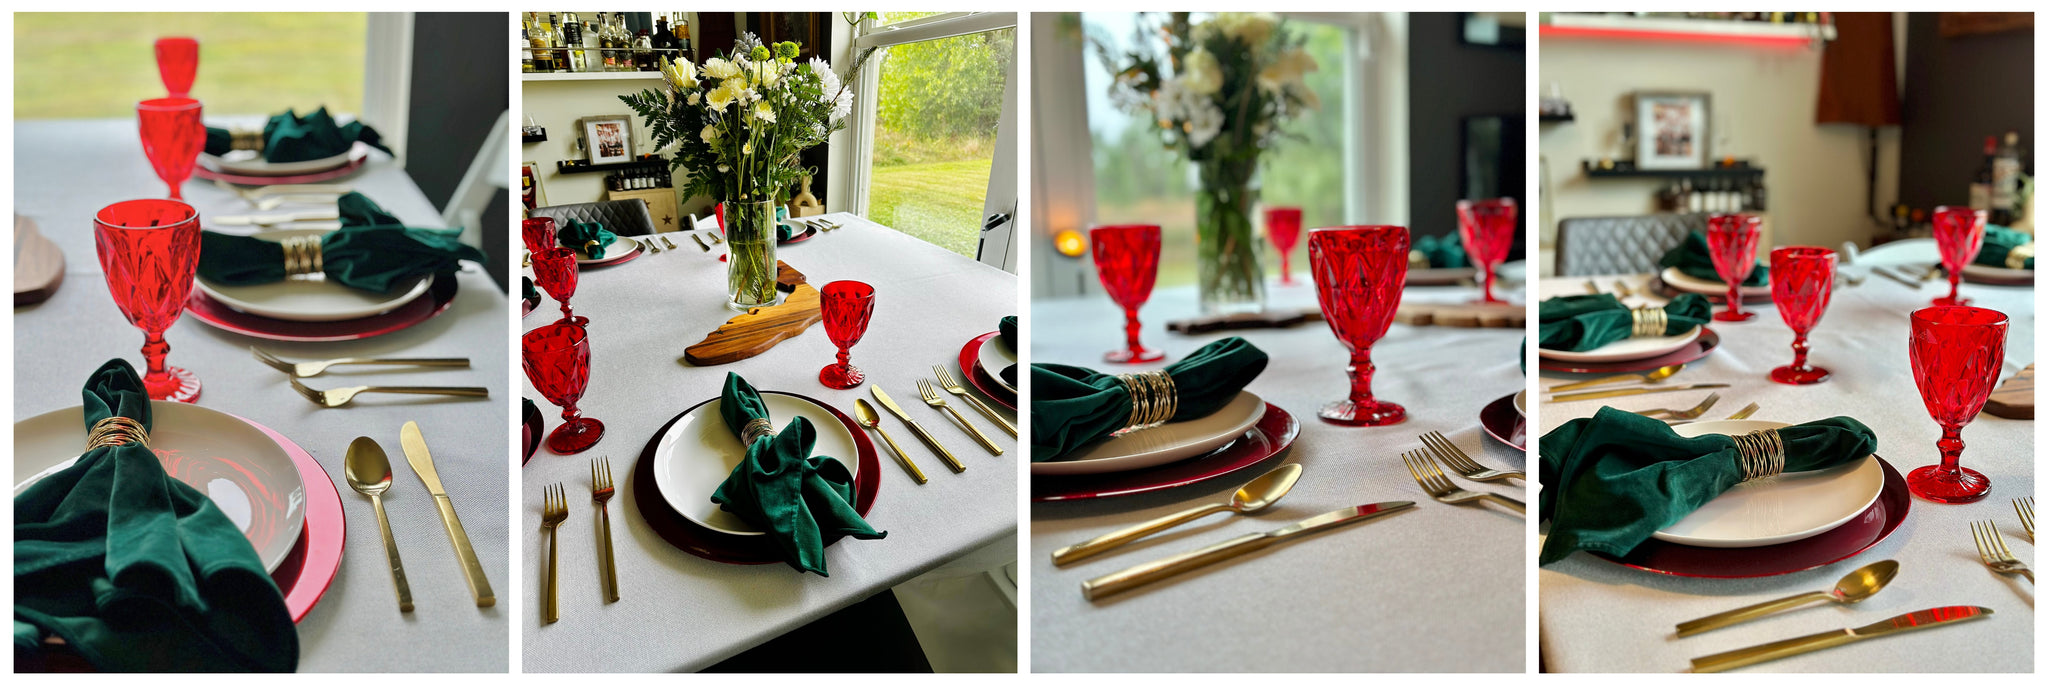 TableTop Creations makes intimate Christmas dinner at home MERRY MERRY - client testimonial